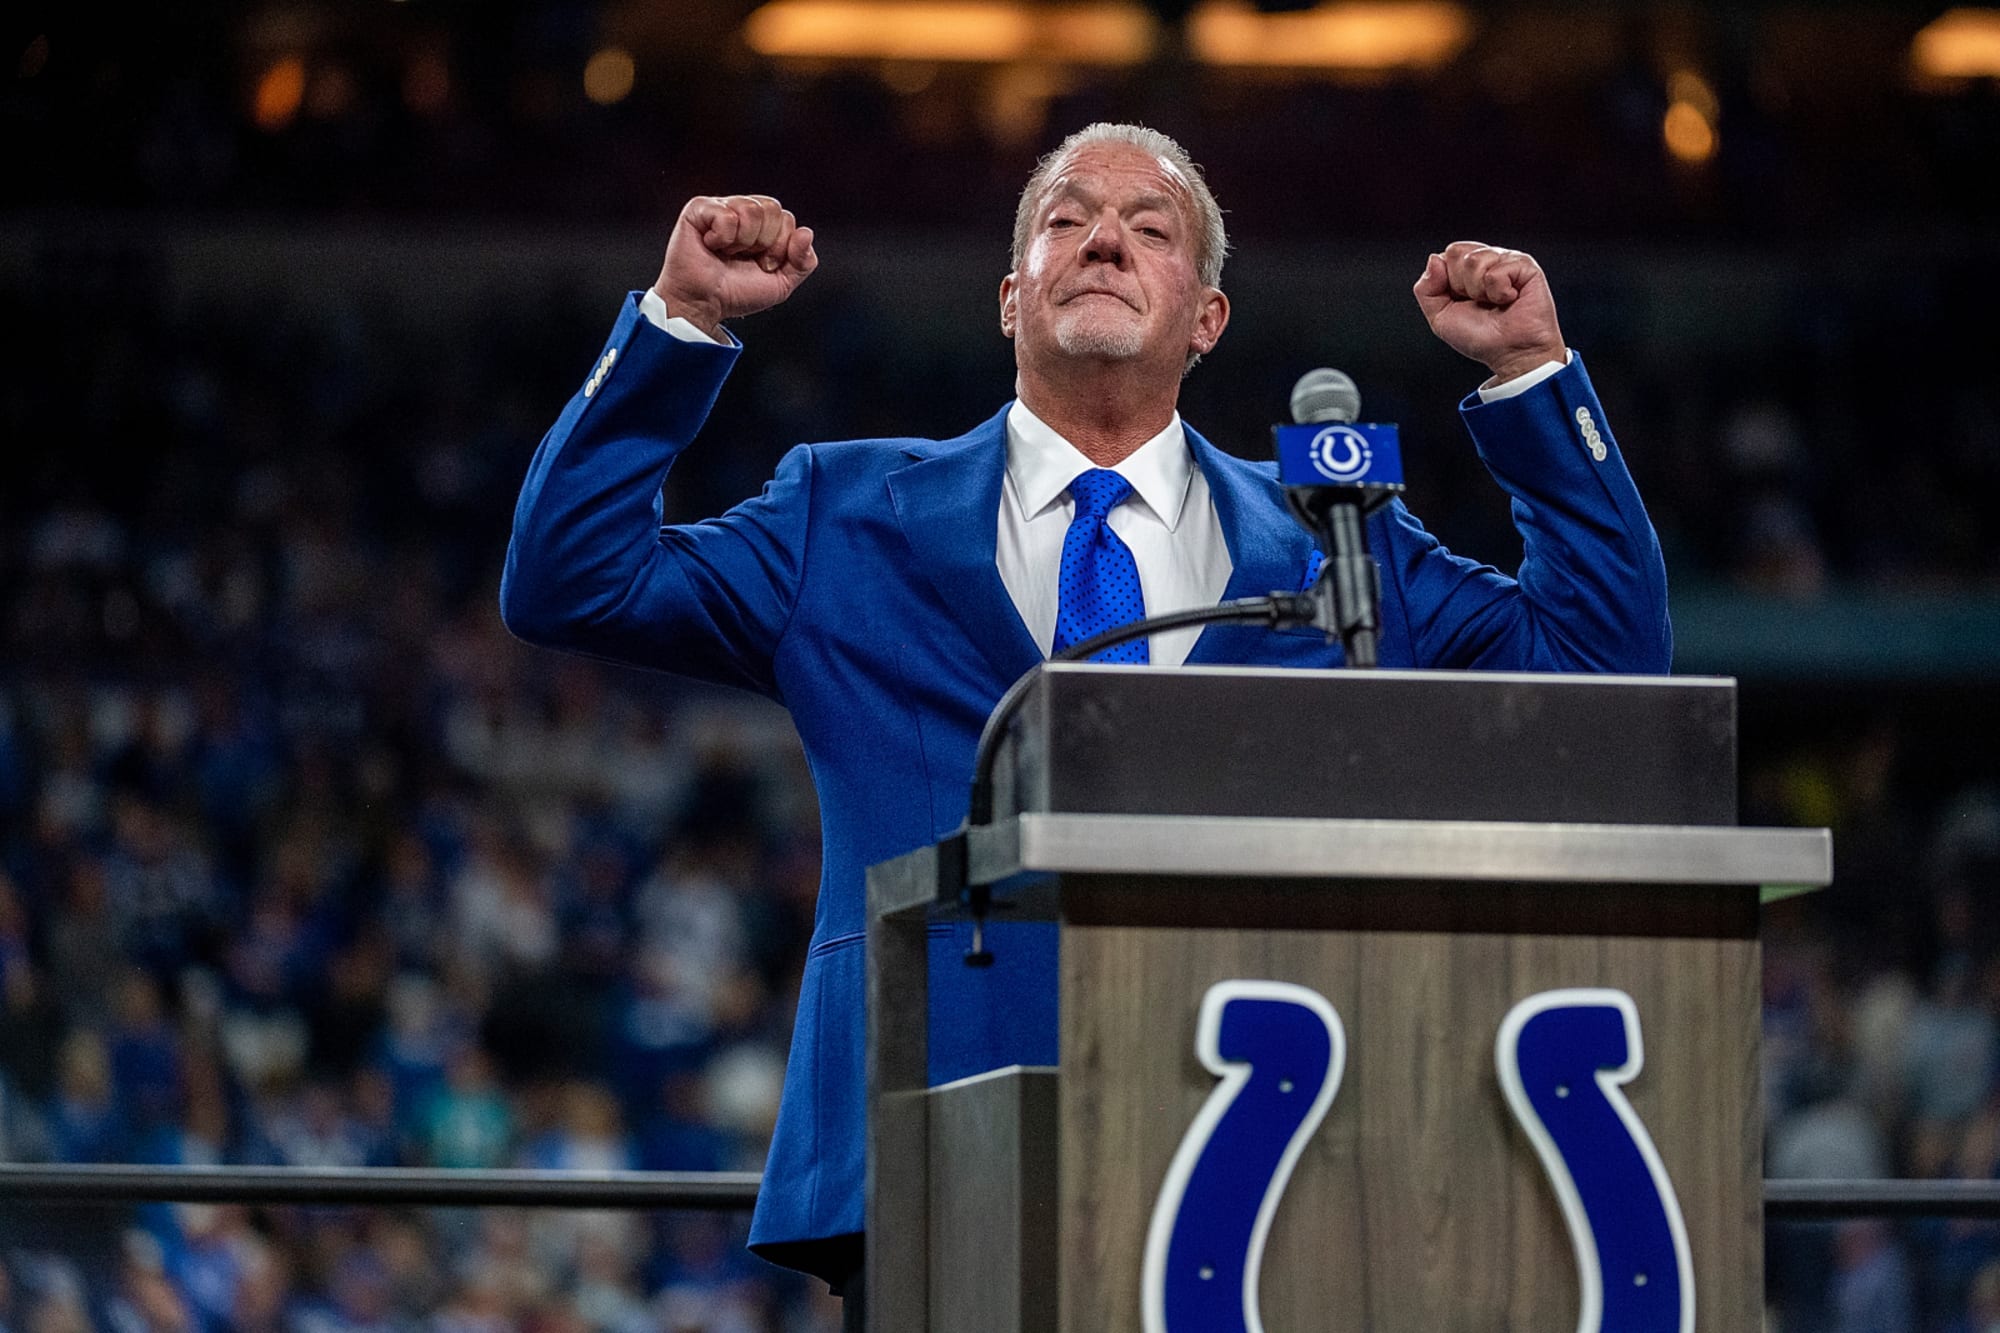 Fallout from Jim Irsay’s powerful move against Commanders’ Dan Snyder